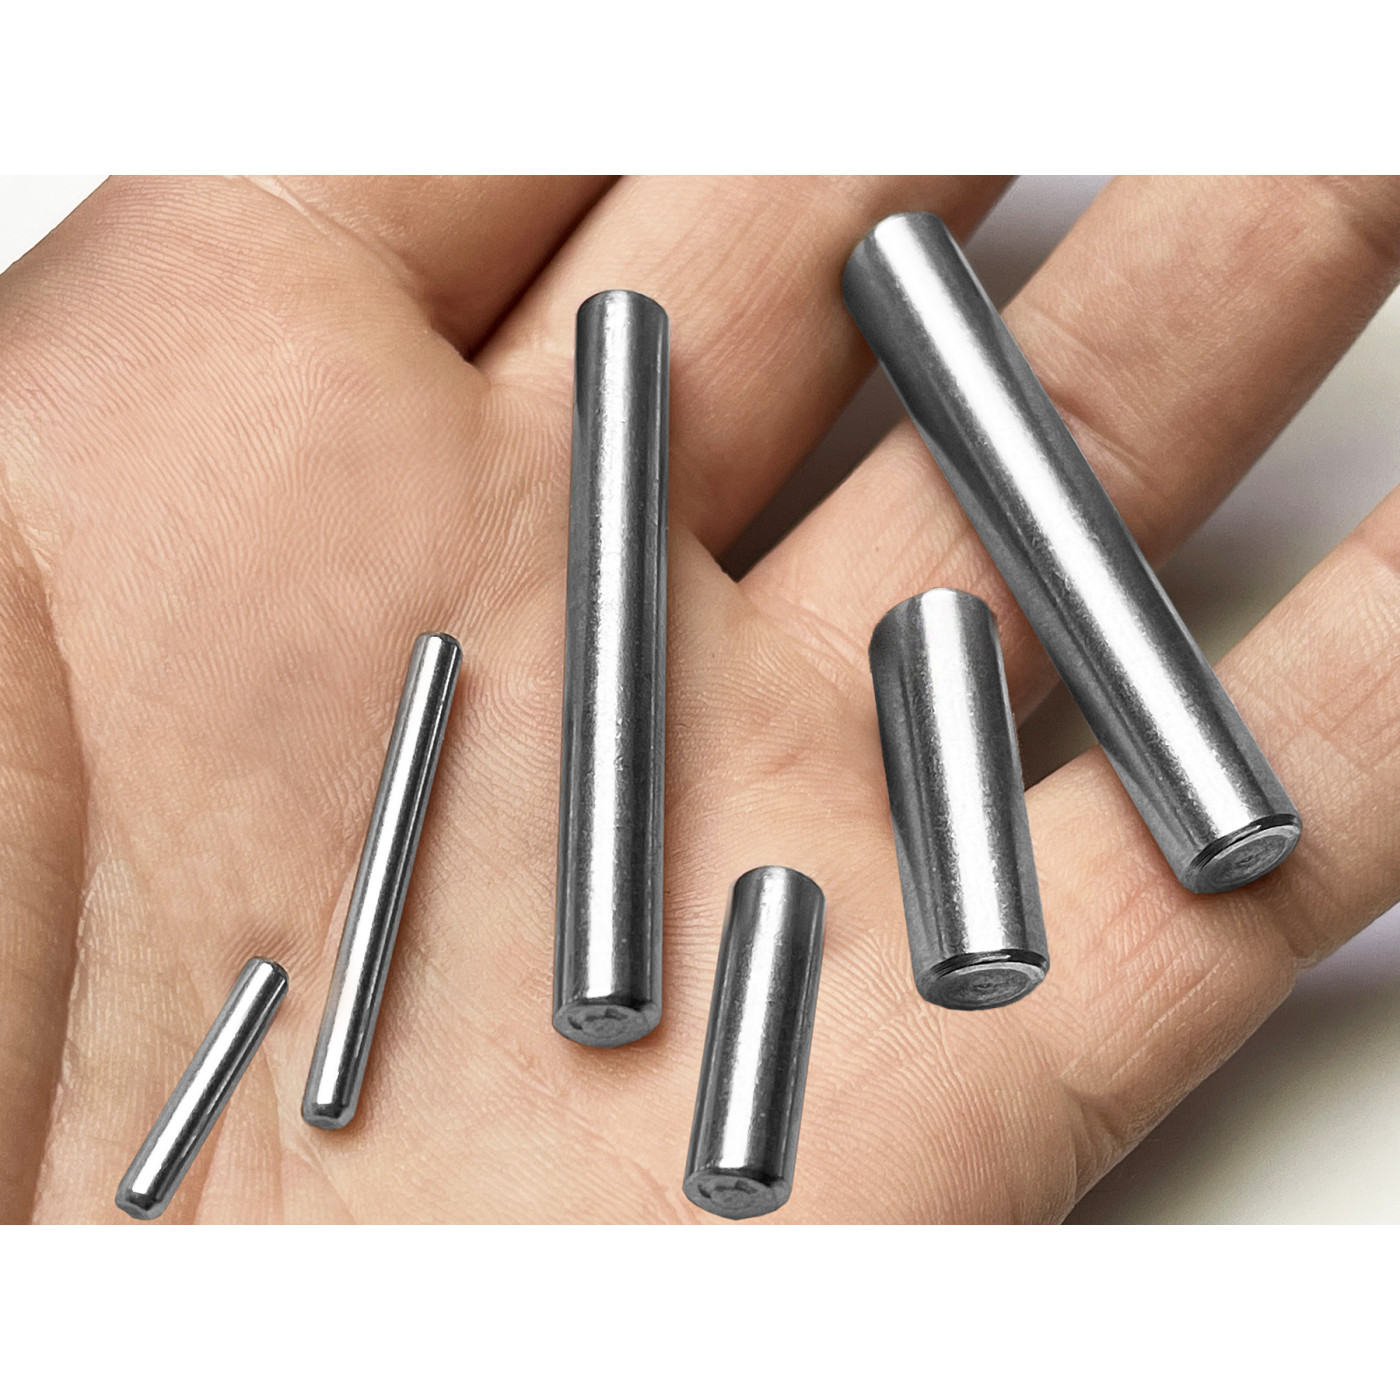 Set of 30 cylinder shaped rods (8.0x50 mm, stainless steel 304